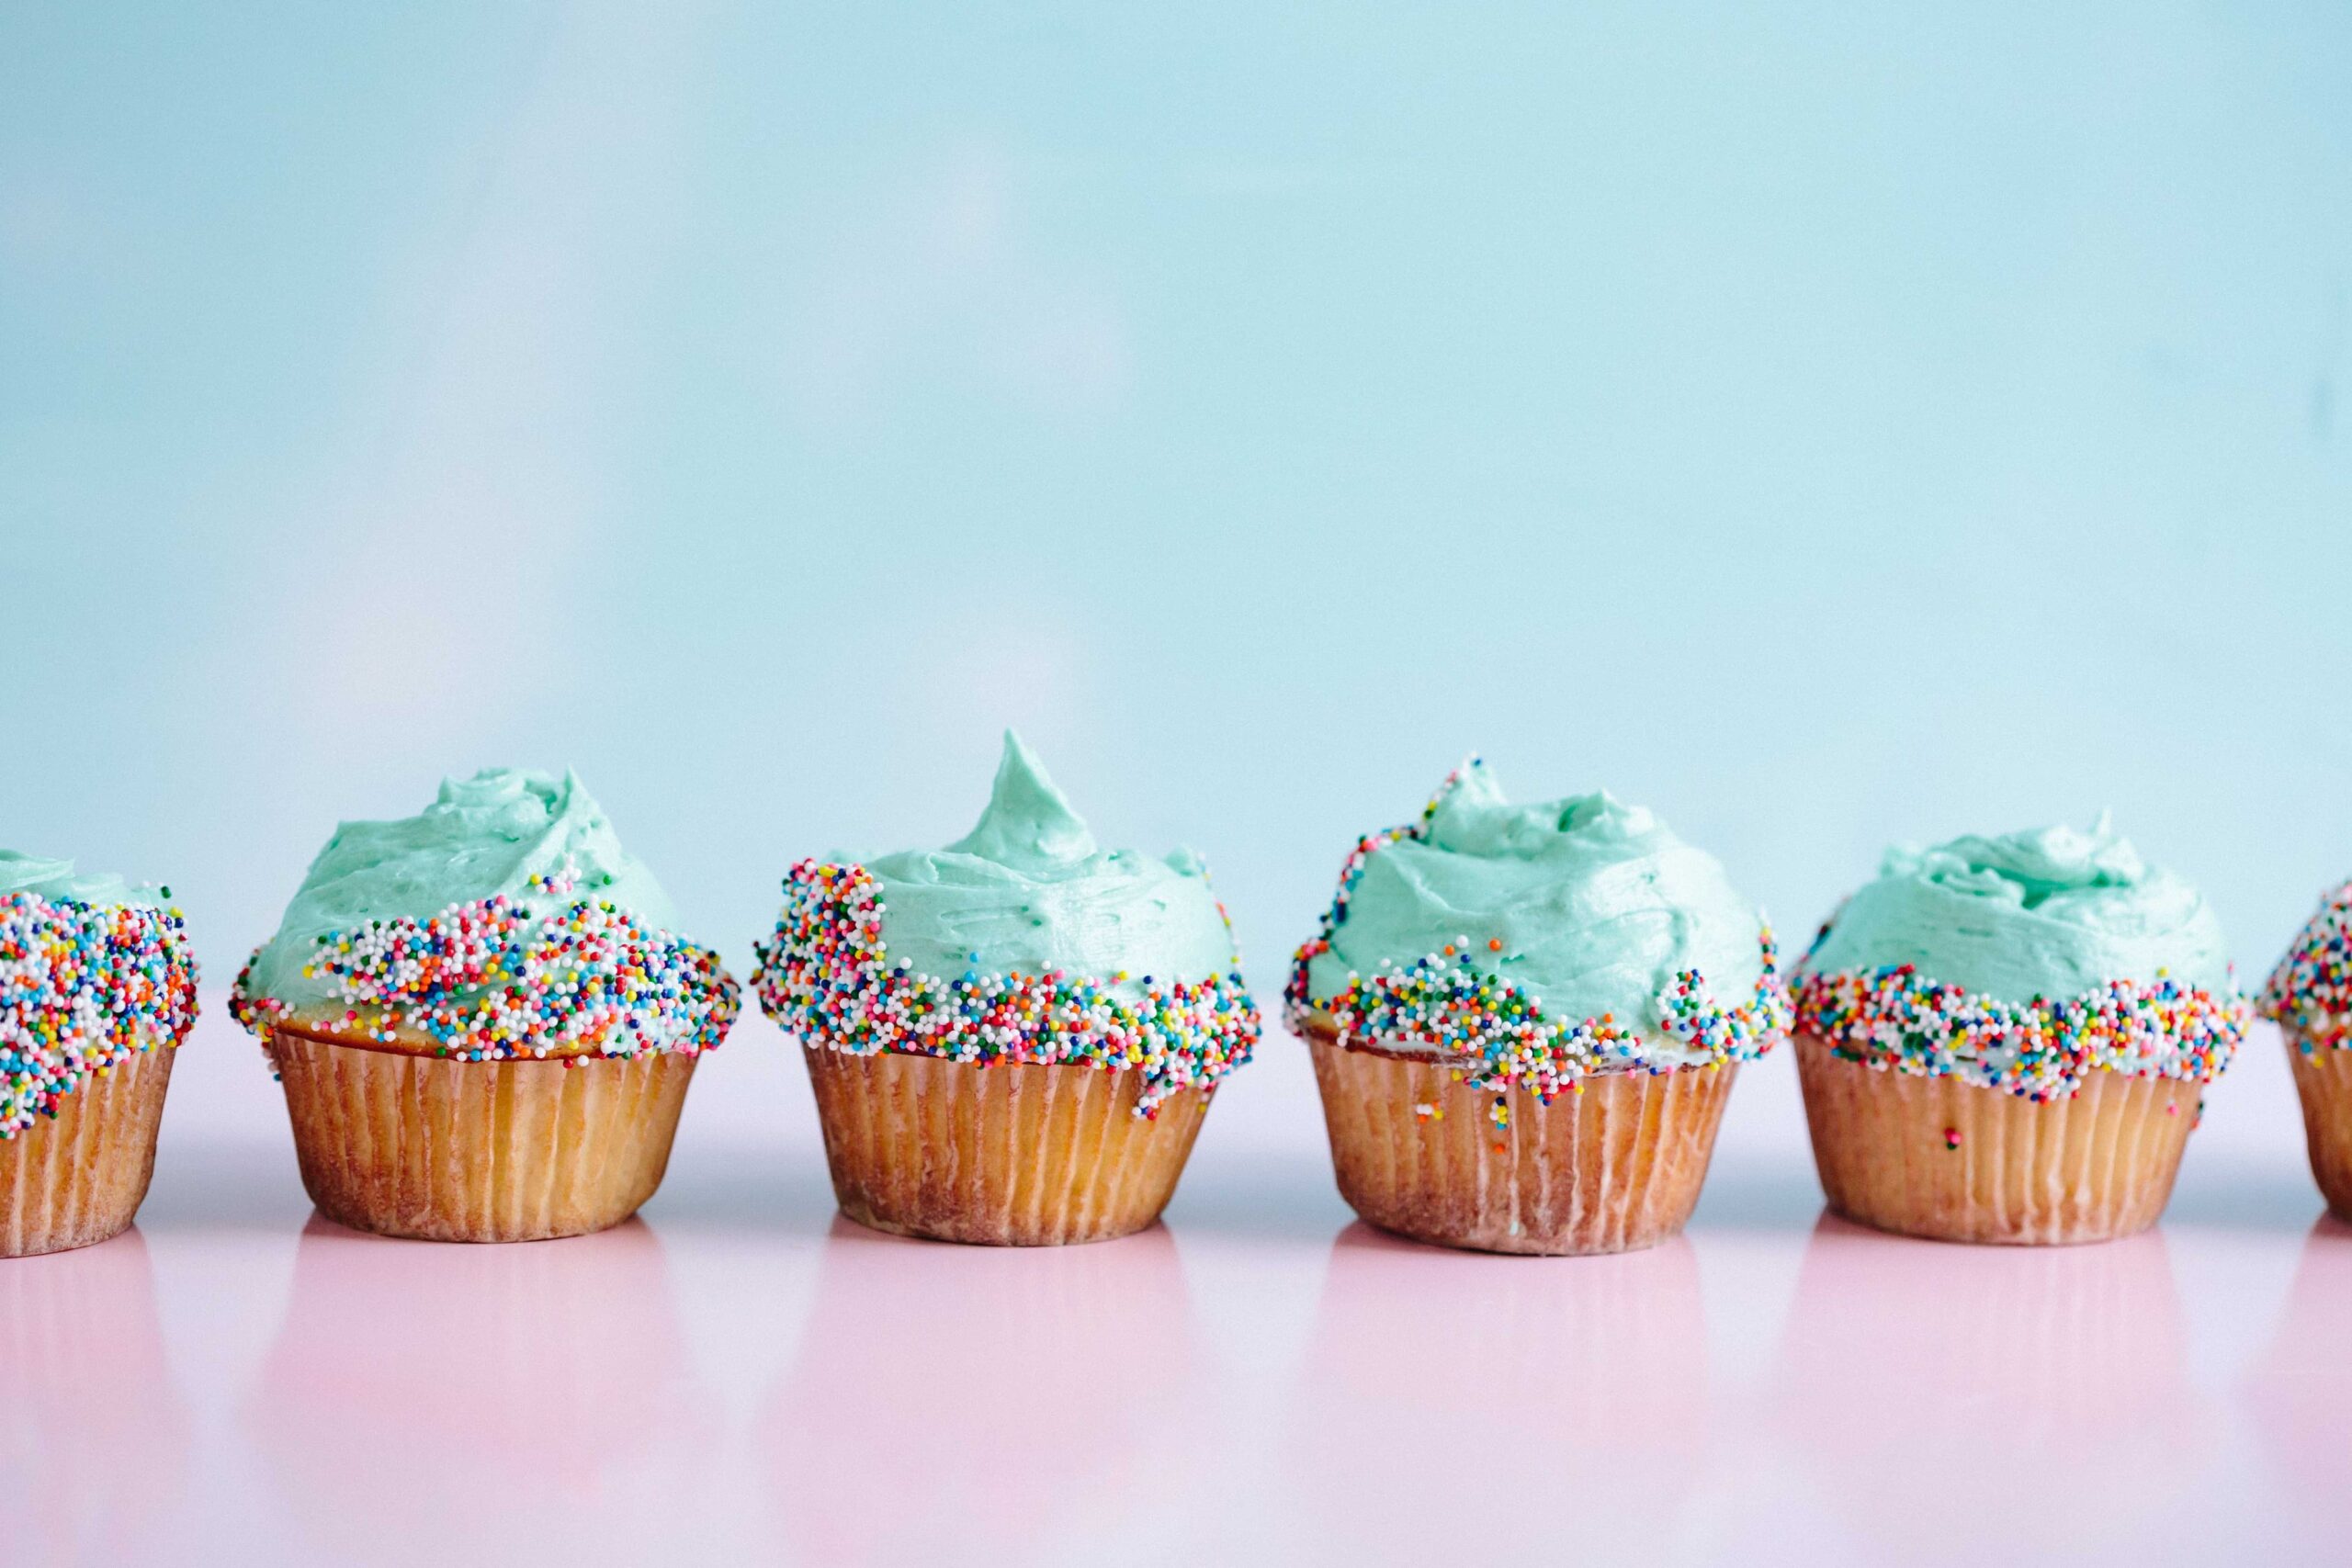 How to Make Cupcakes: A Flash Fiction Story